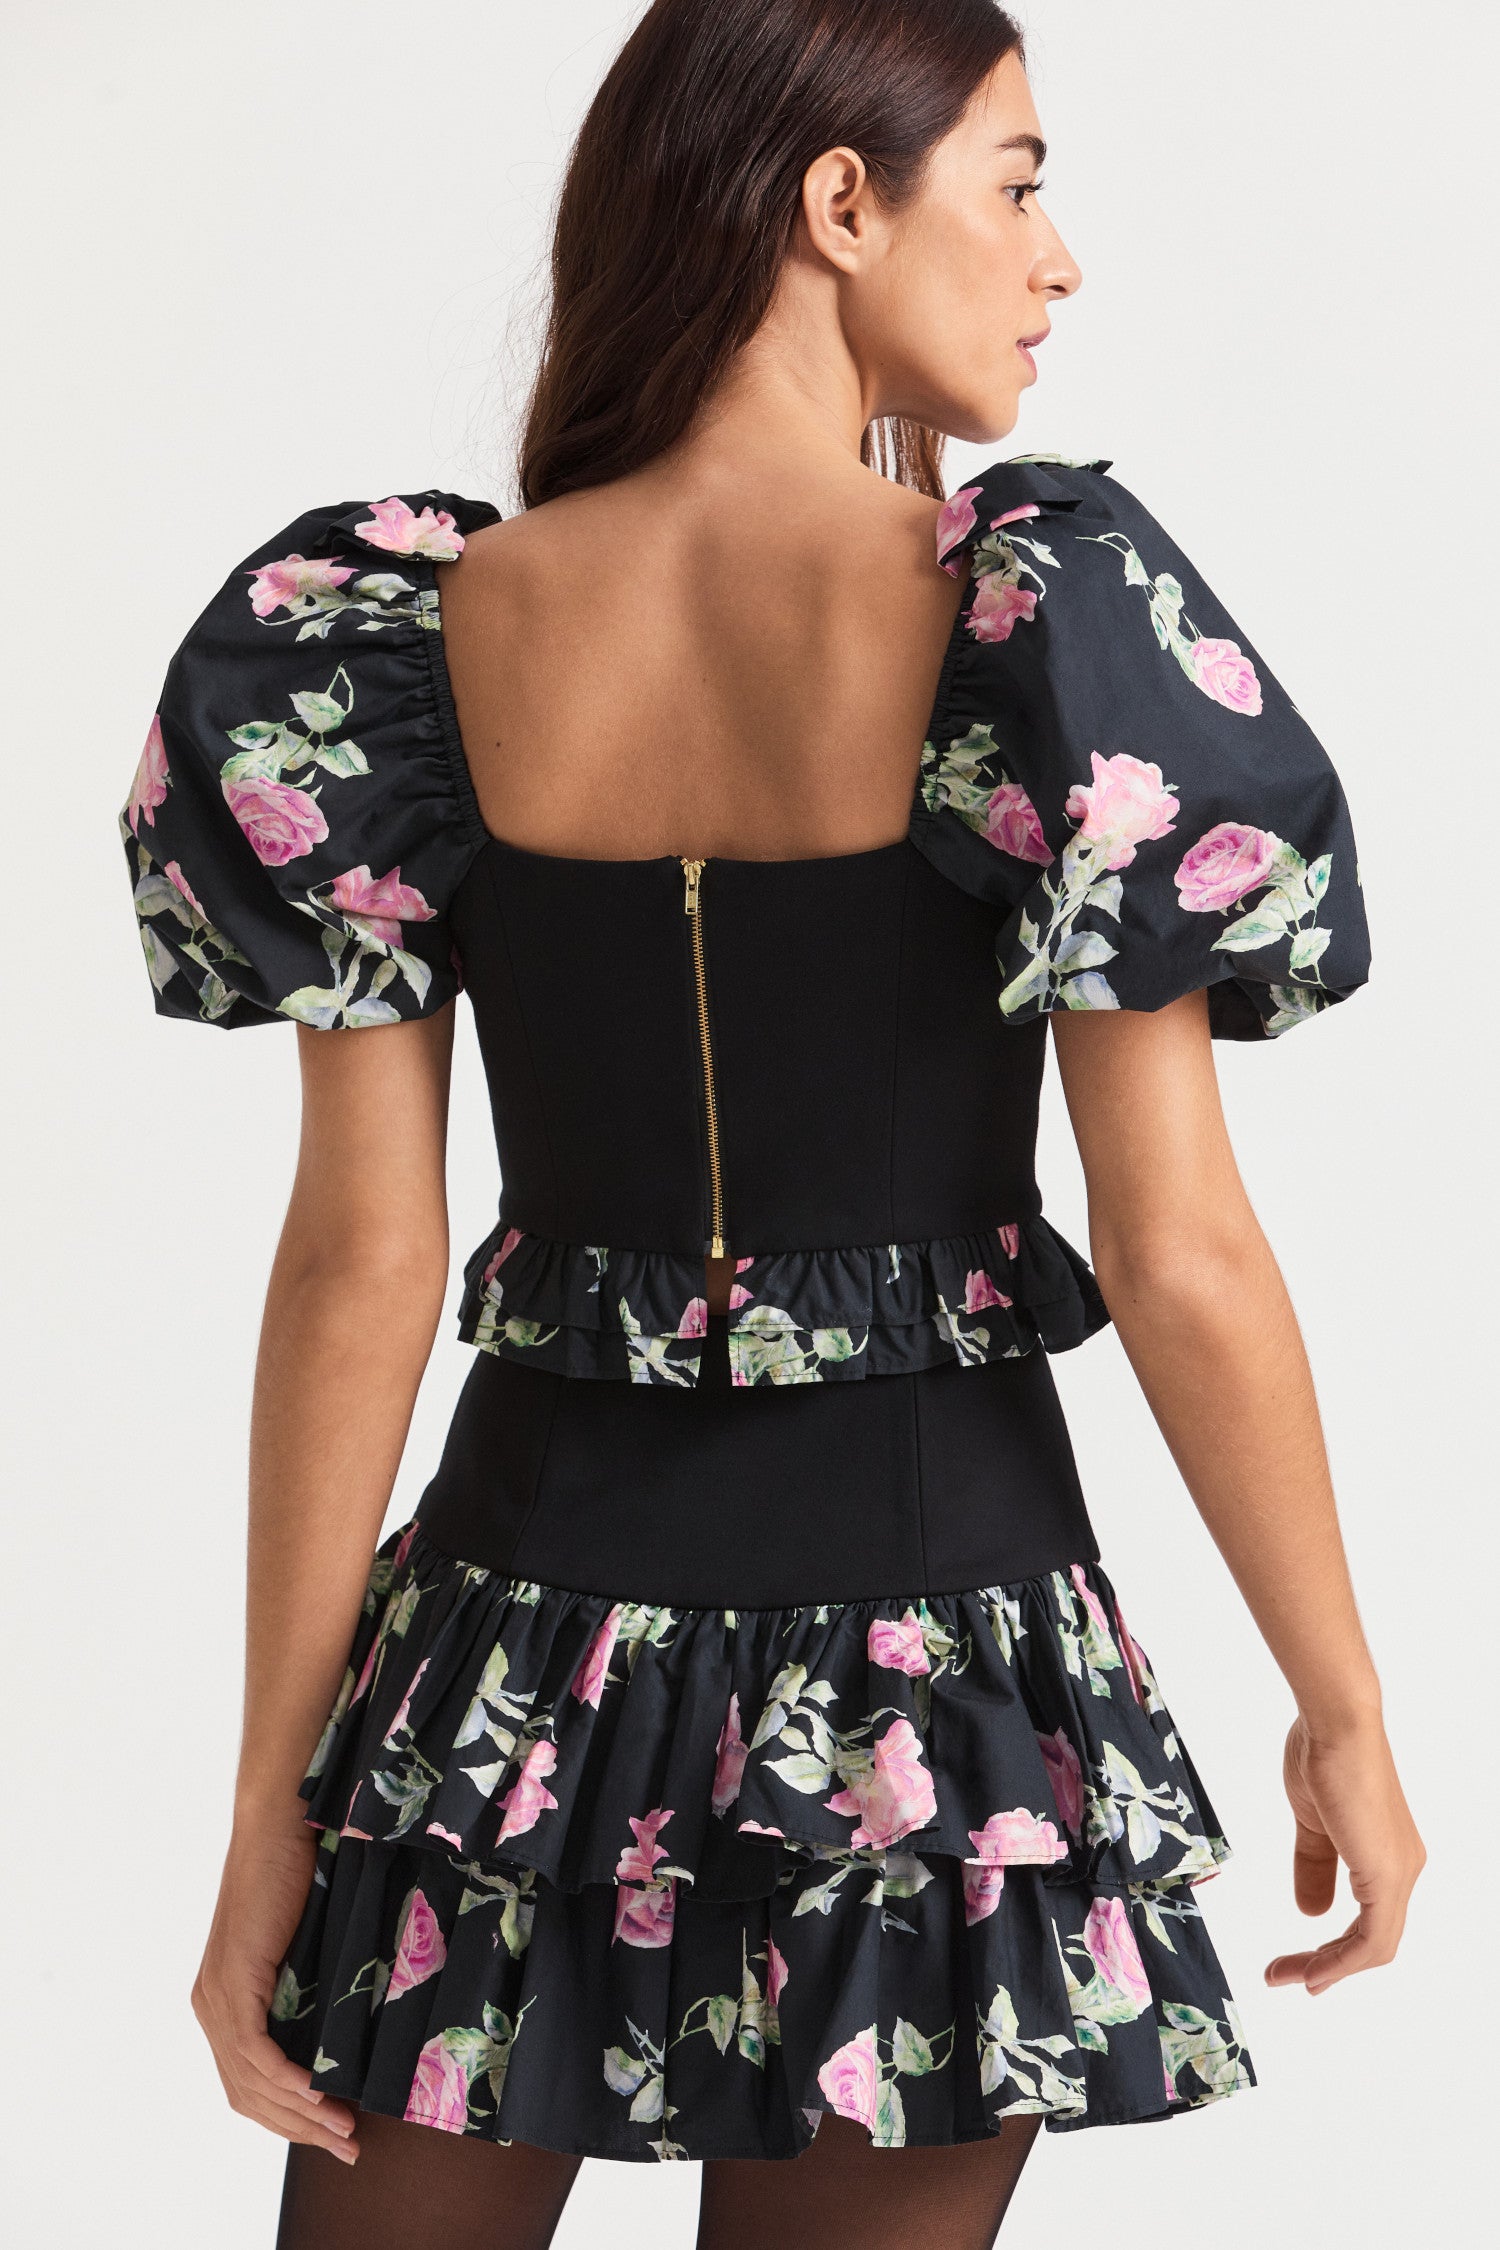 Black floral crop top with puff sleeves, a stretchy bodice and ruffle peplum detailing lines the hem of the top.